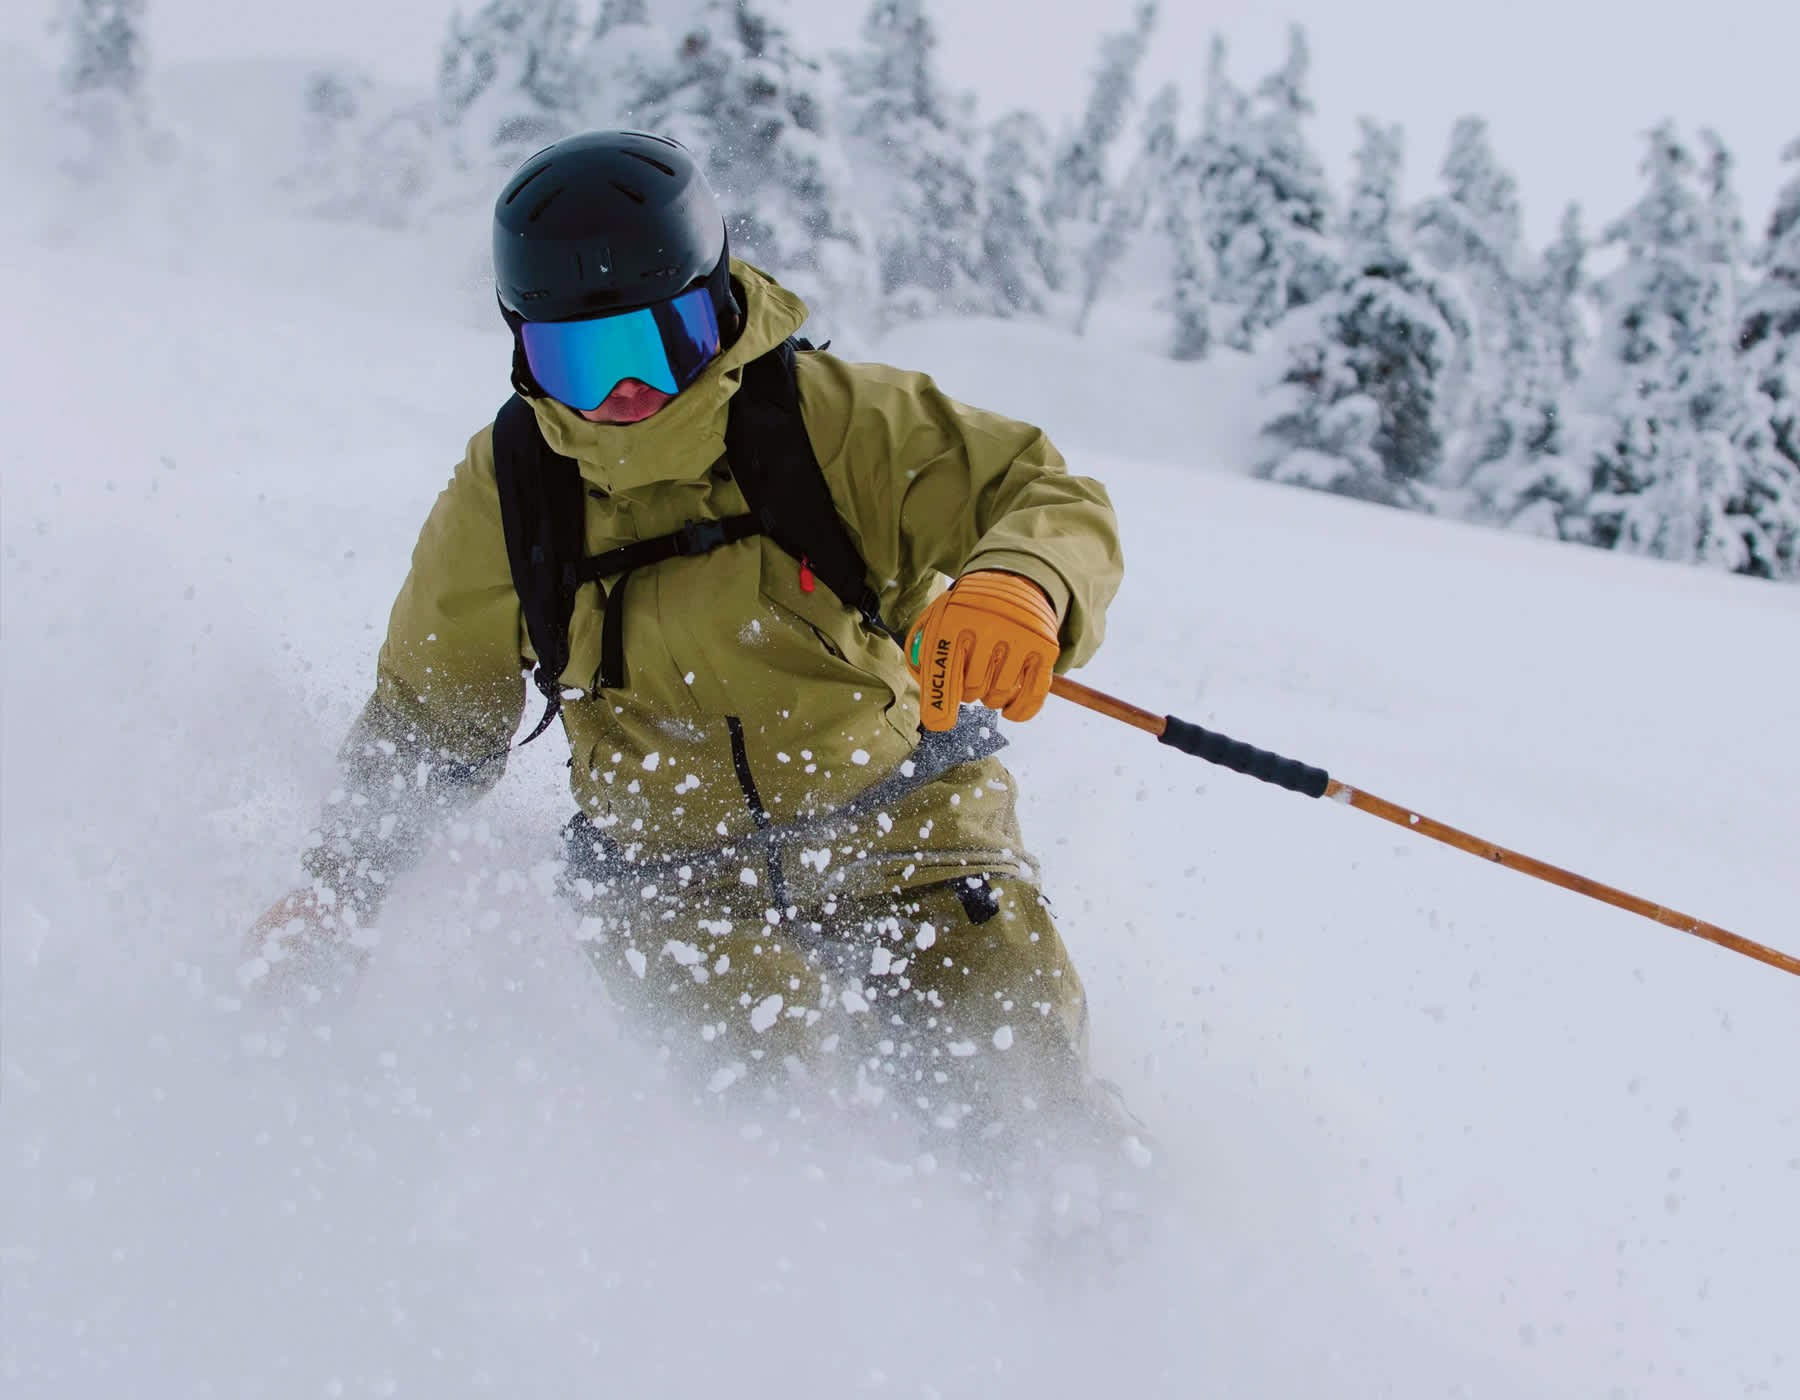 An Auclair athlete sking through powder snow and it flies up in front of him with speed. He is wearing a green jacket, camel colored Auclair gloves while holding ski poles mid turn.